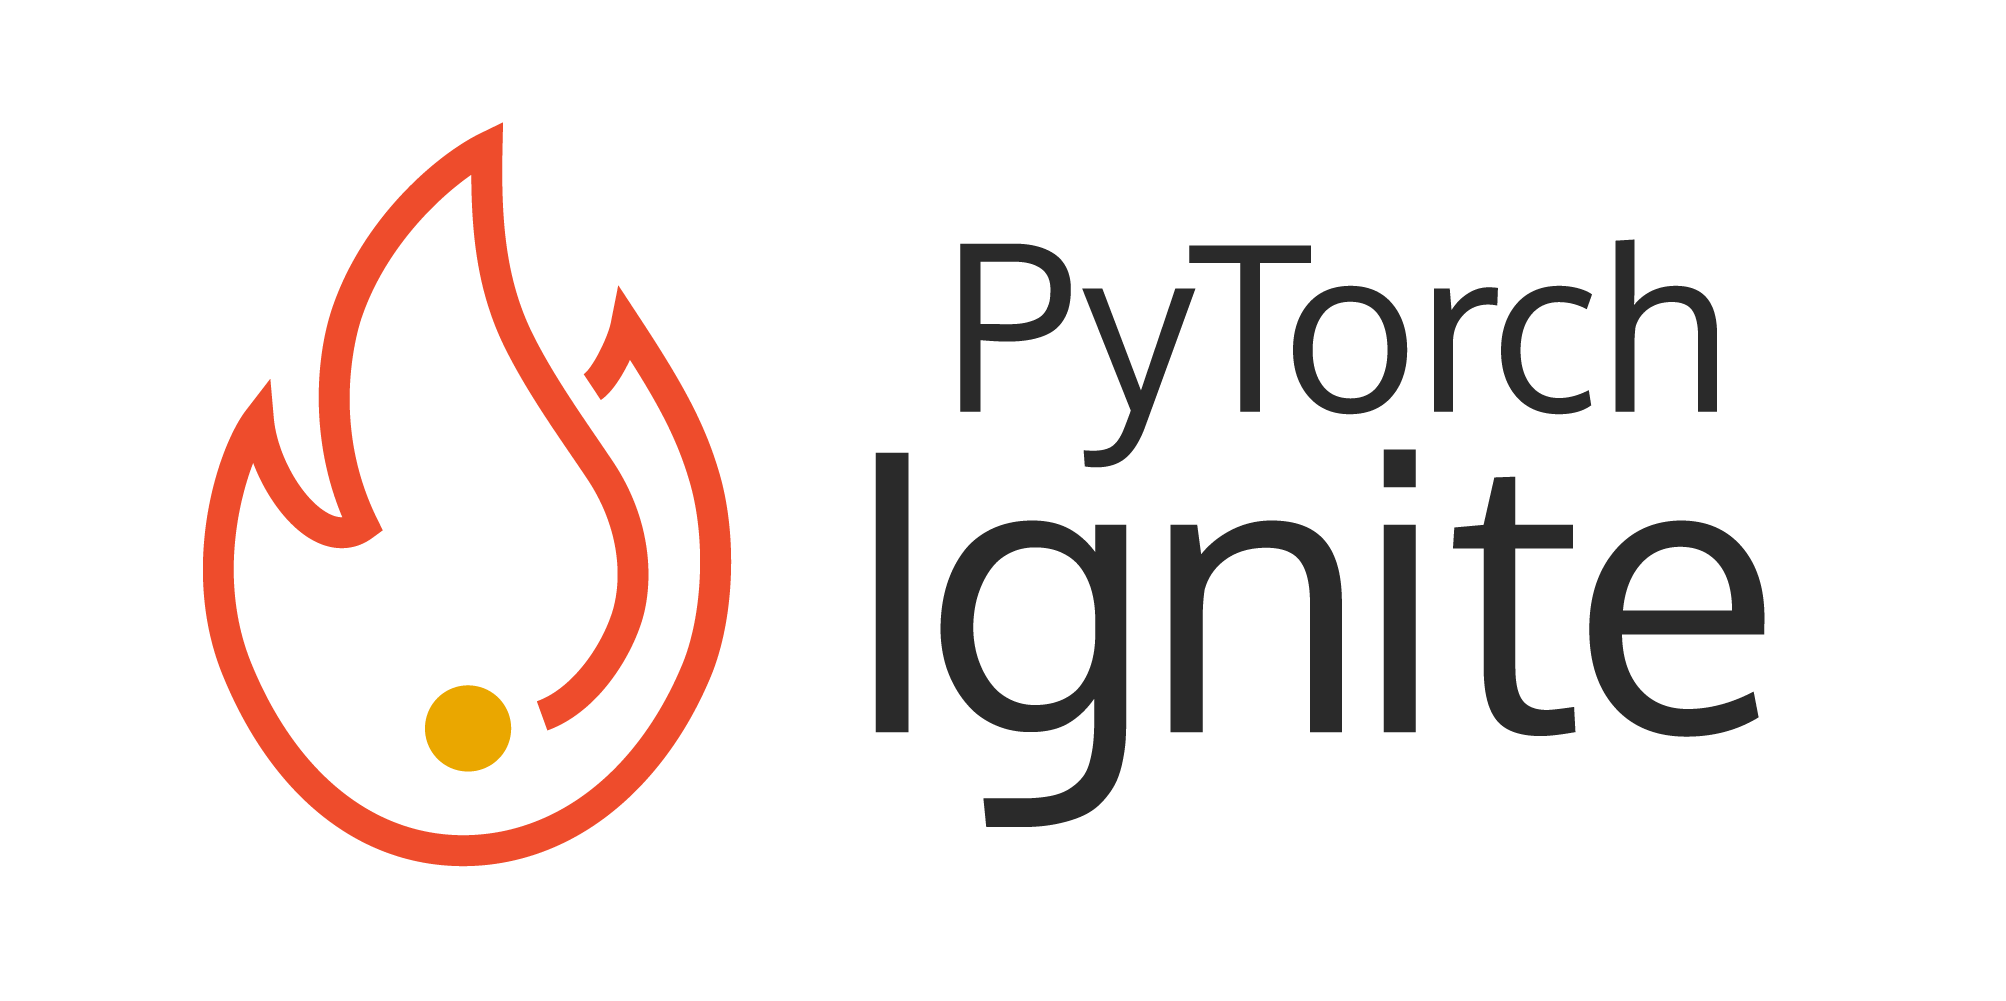 https://raw.githubusercontent.com/pytorch/ignite/master/assets/logo/ignite_logo_mixed.png